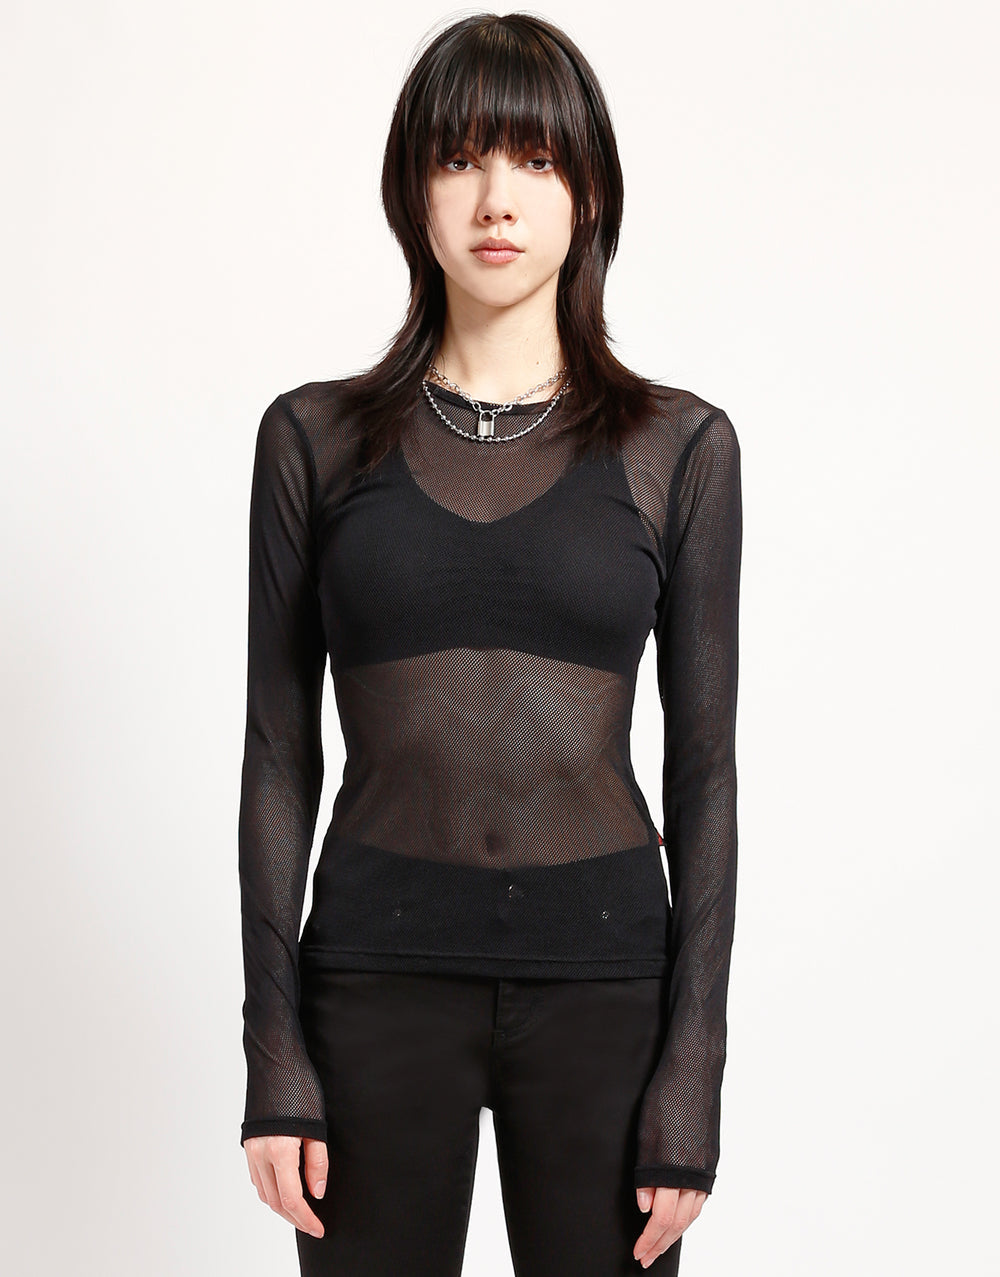 A model wearing the black Long Sleeve Baby Doll Fishnet Shirt with black bra and pants, front view.